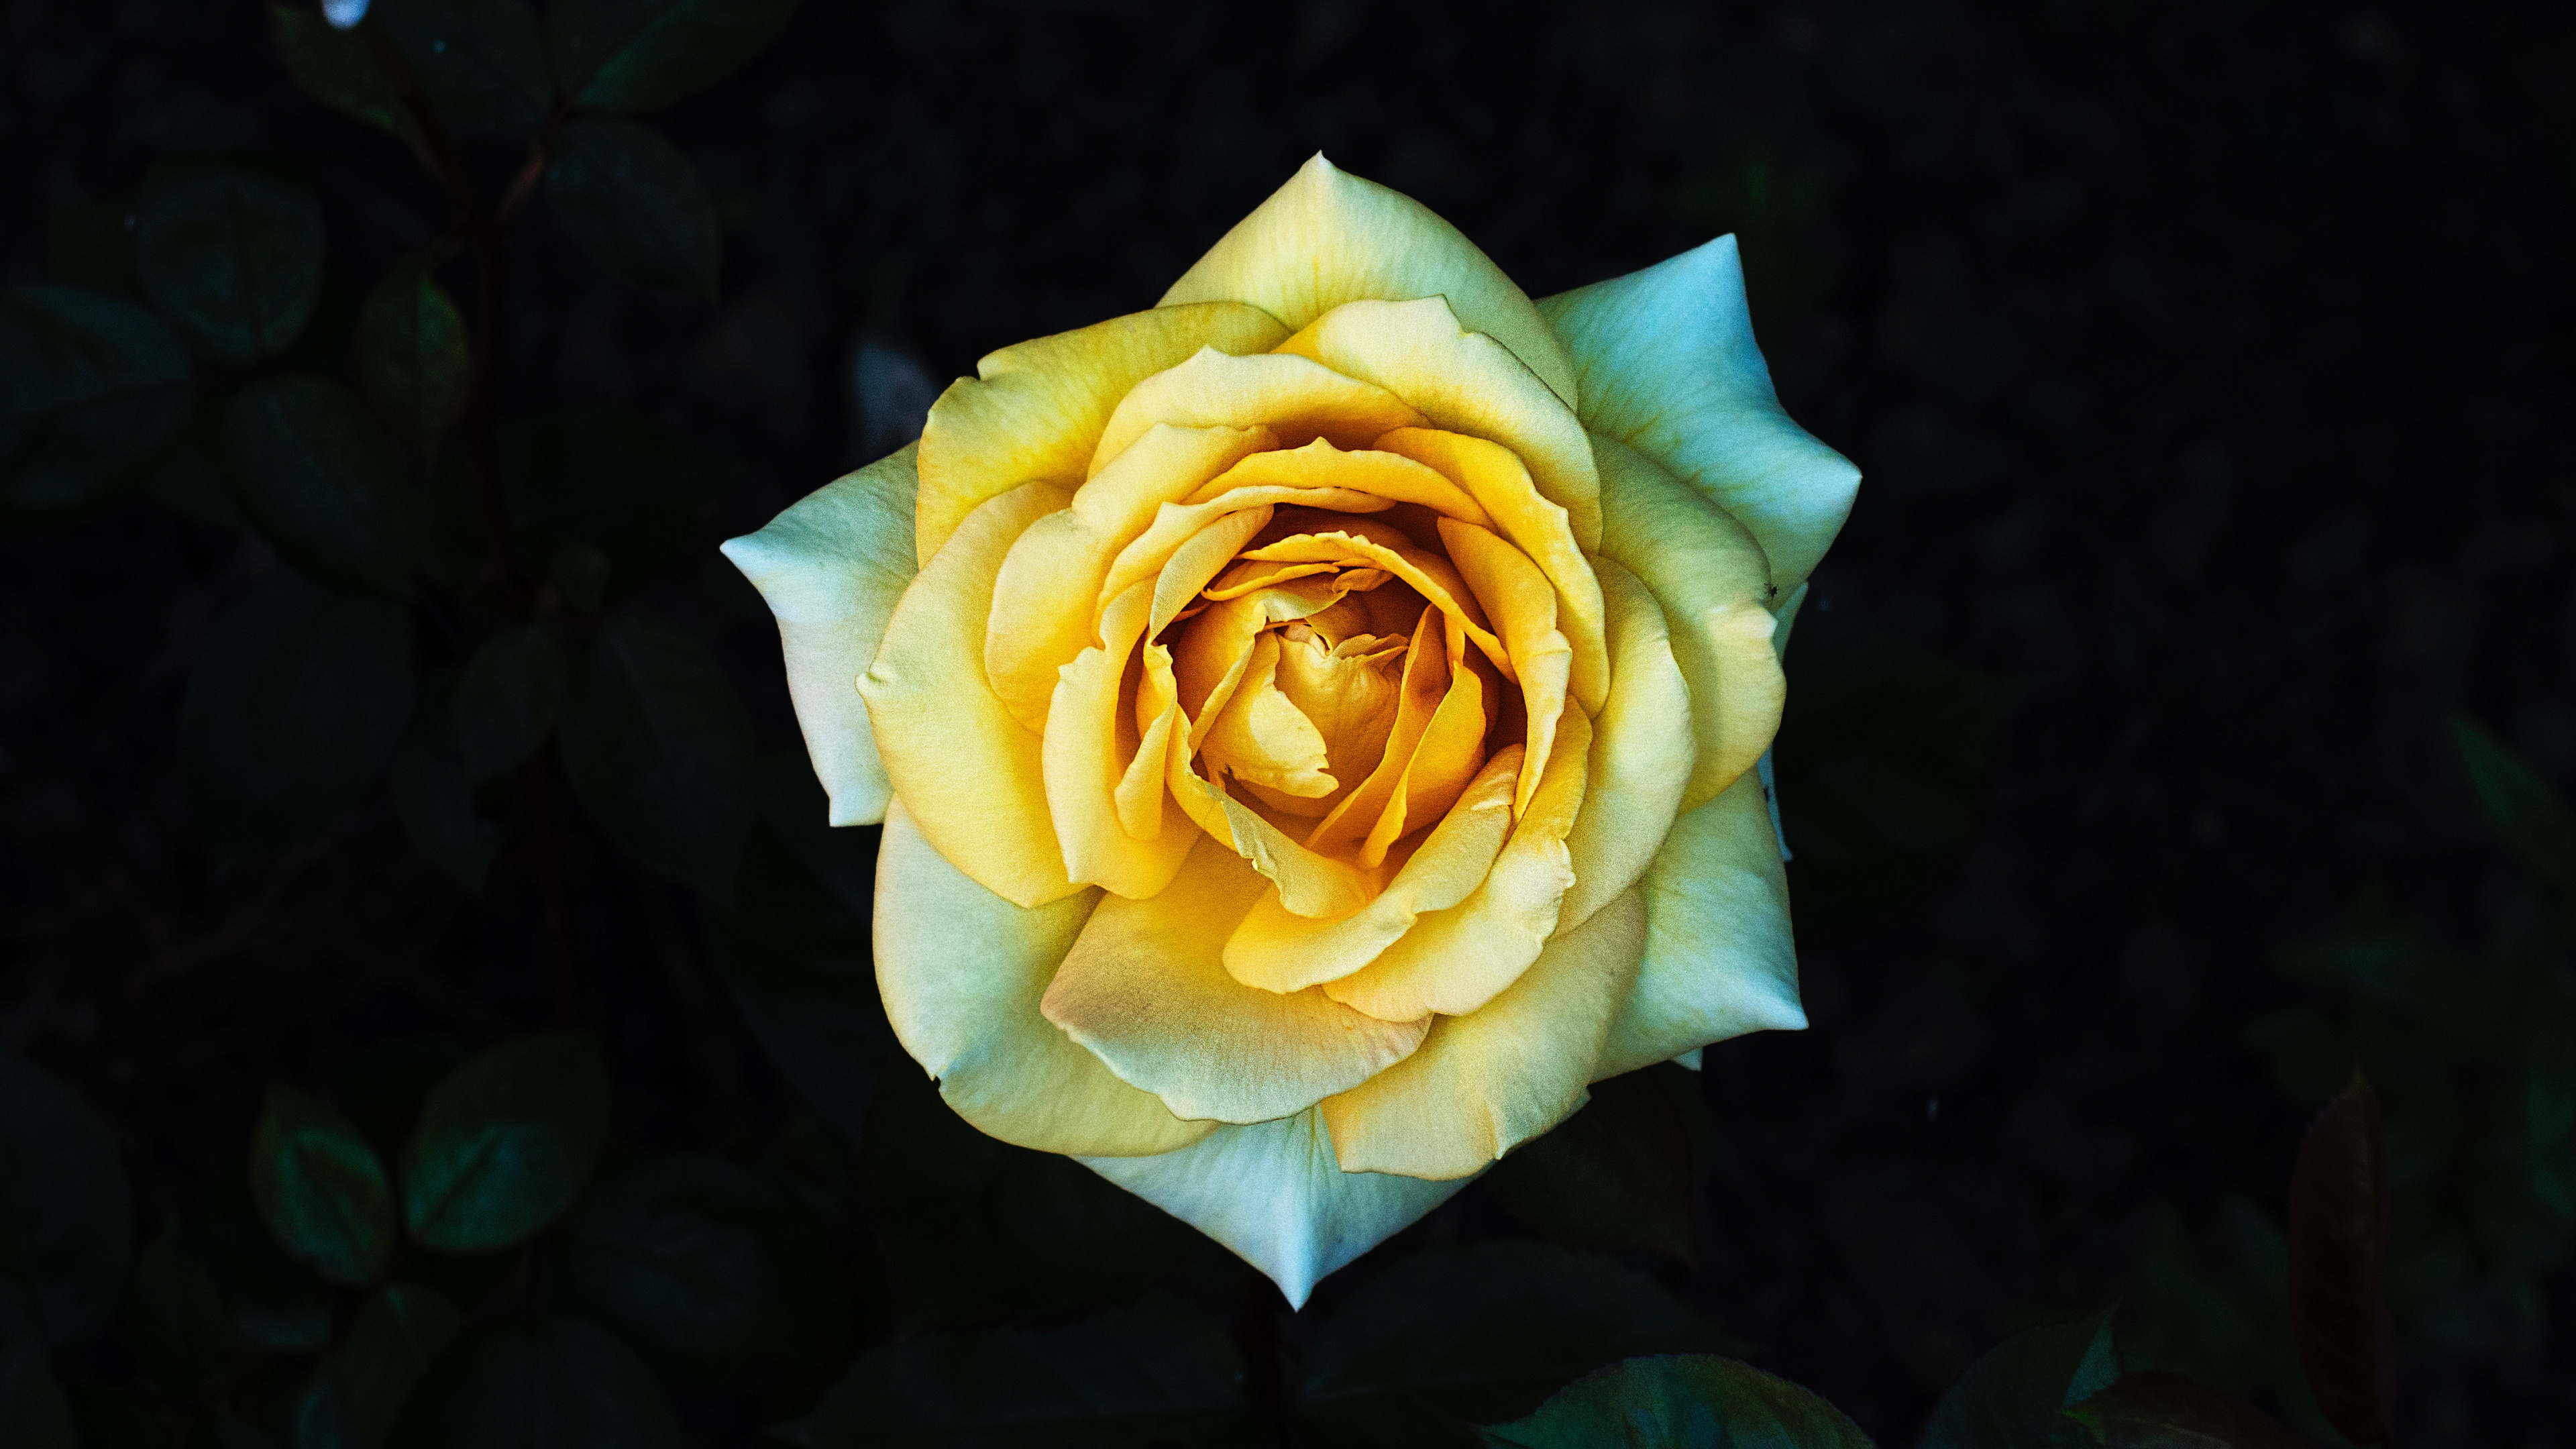 Yellow Rose in Bloom Close up Photo. Wallpaper in 3840x2160 Resolution